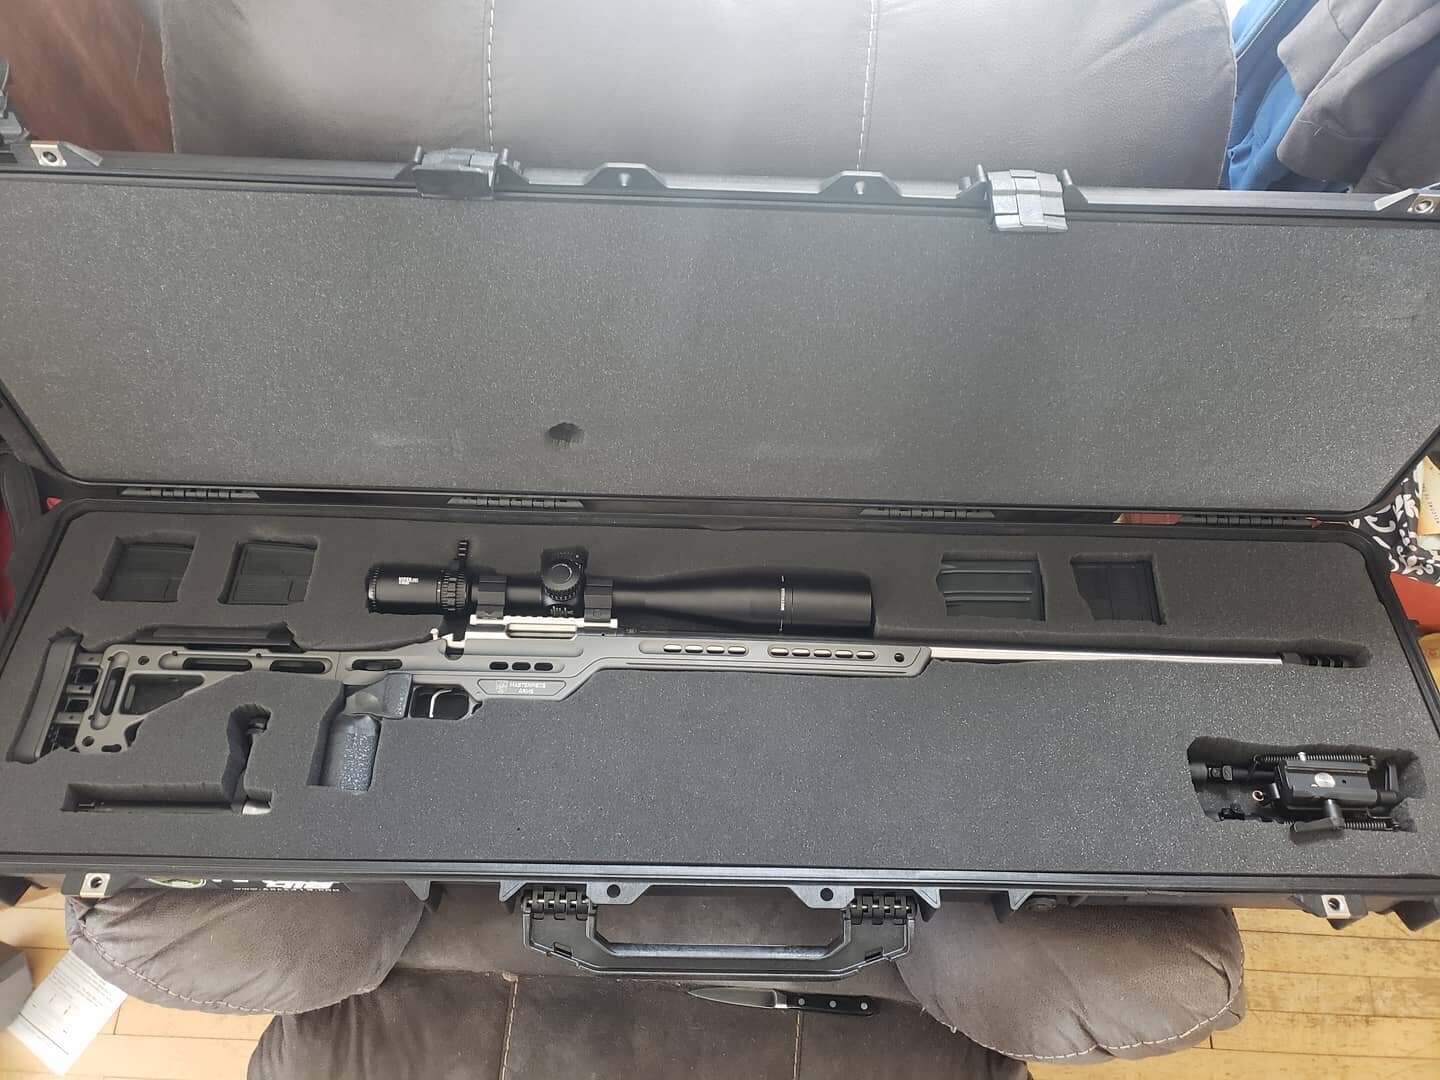 rifles new case almost complete. MPA BA PMR COMPETITION 6.5 CR. cant wait to hit the range